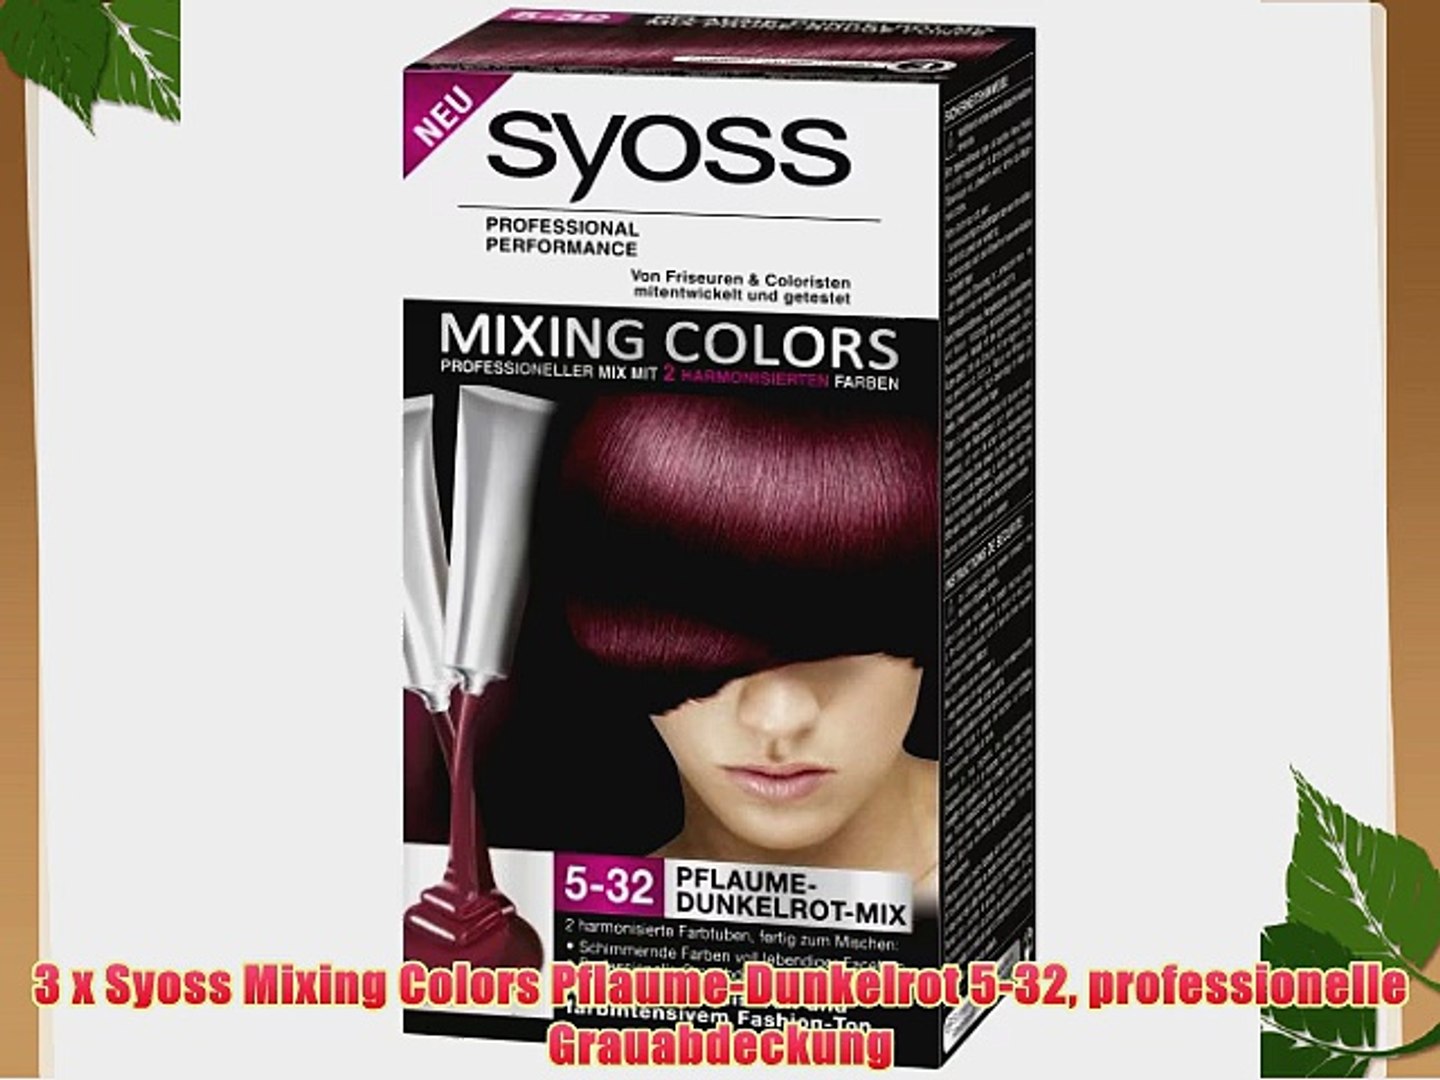 3 x Syoss Mixing Colors Pflaume-Dunkelrot 5-32 professionelle Grauabdeckung  - video Dailymotion